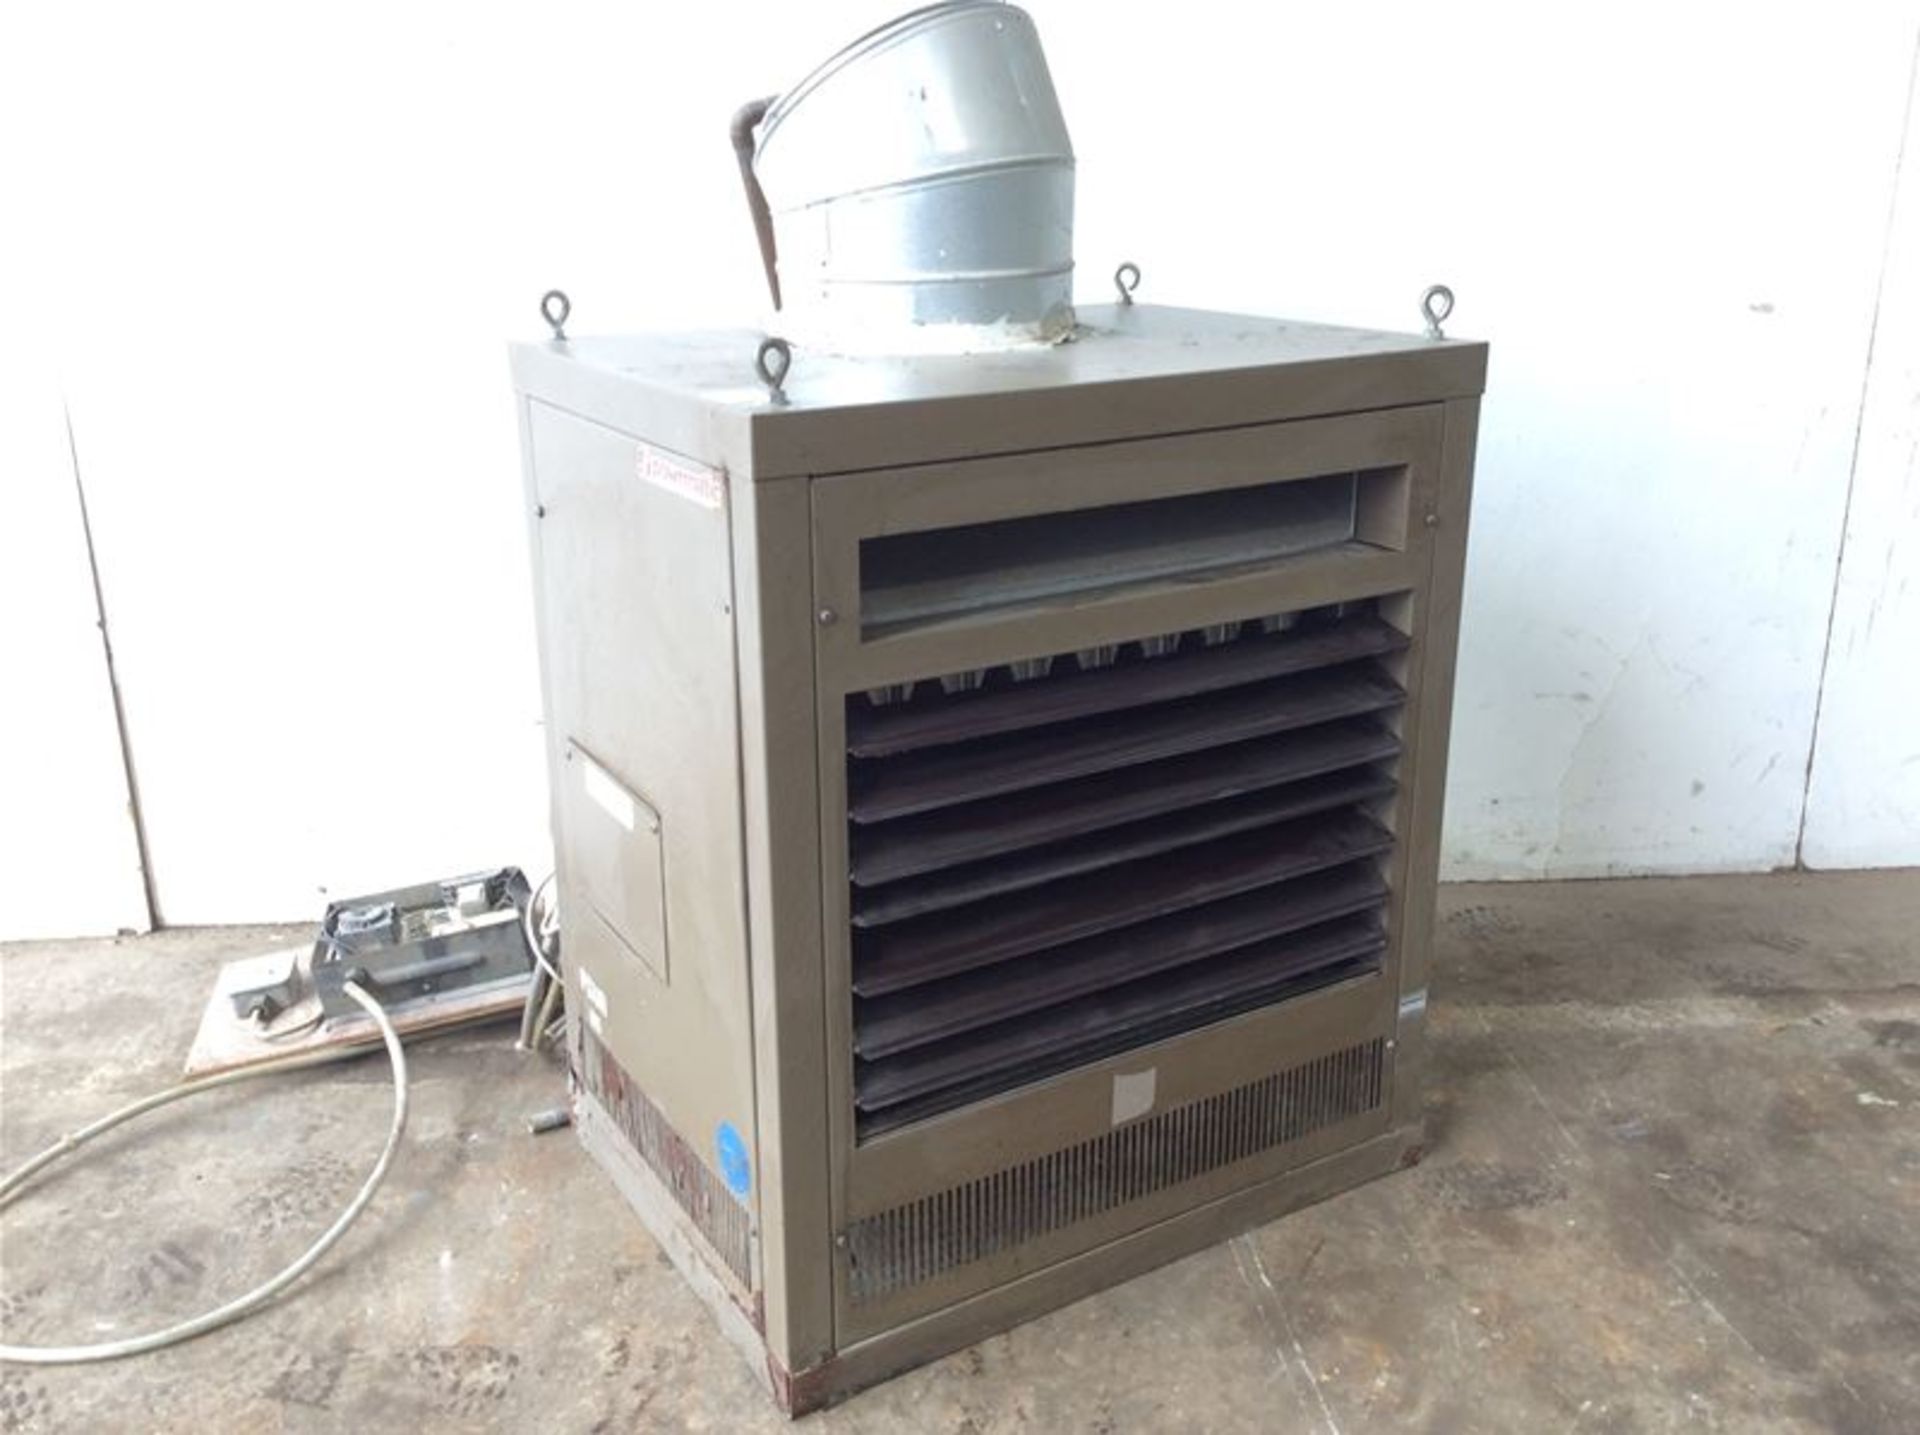 POWERMATIC PGUH 85 F SUSPENDED NATURAL GAS FIRED AIR HEATER UNIT - 25KW